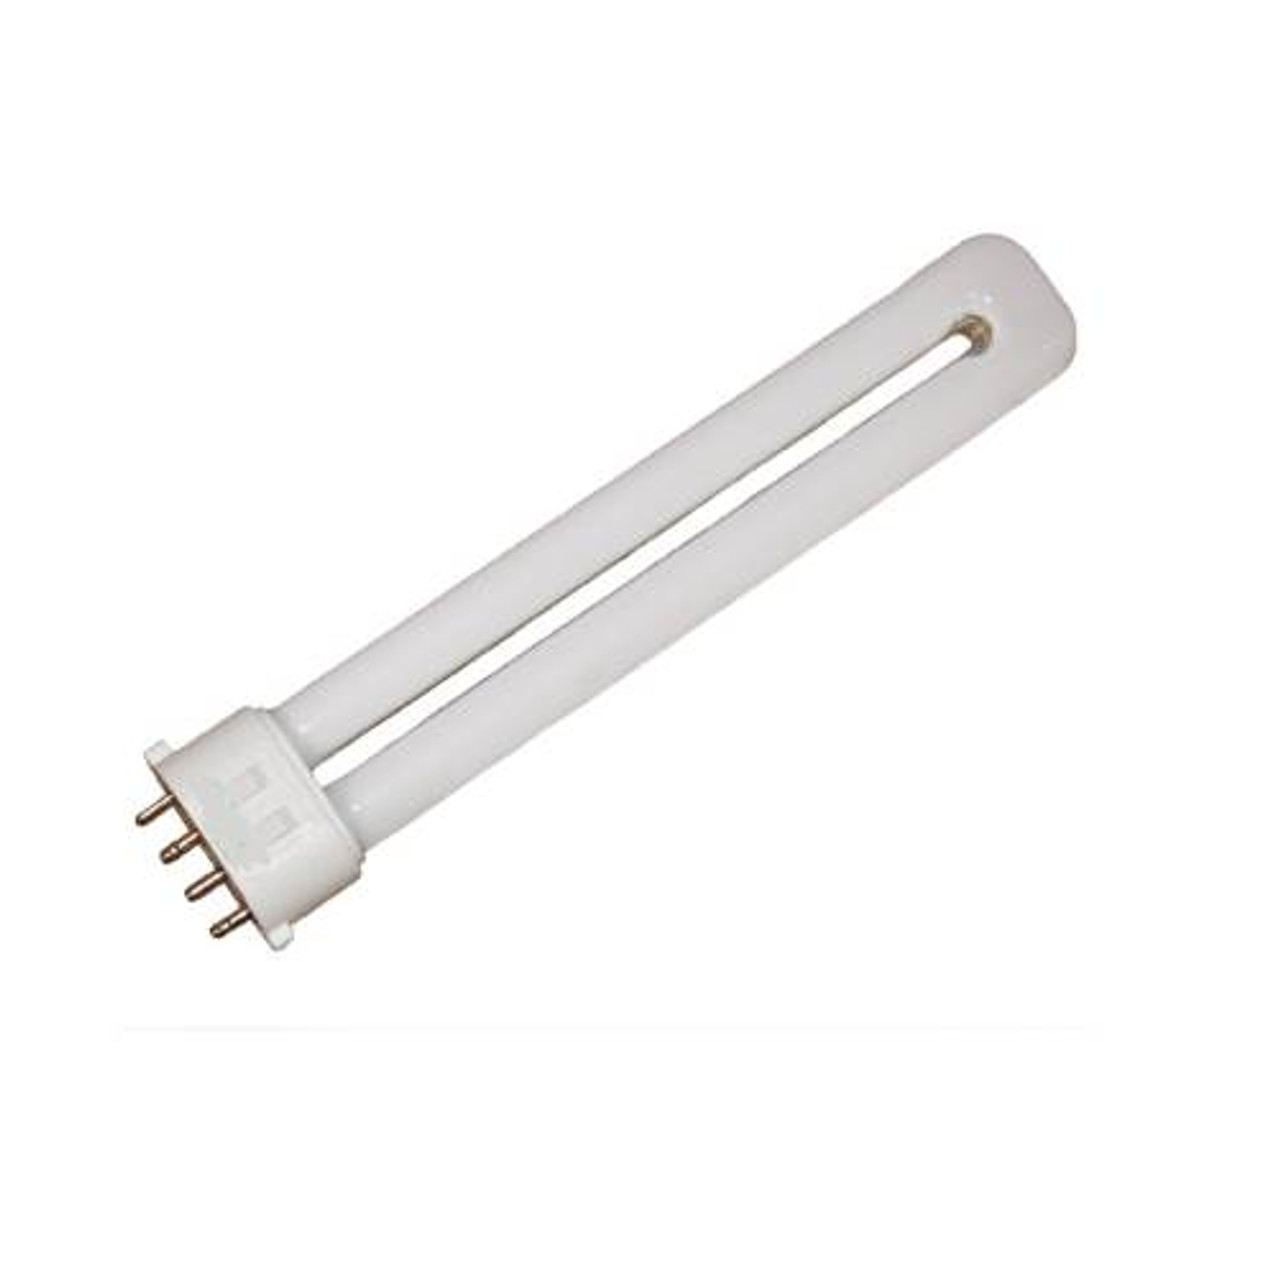 Osram Single Ended 9W 600lm 2G7 Lumilux Interna 4-pin Dulux S/E CFL Lamp